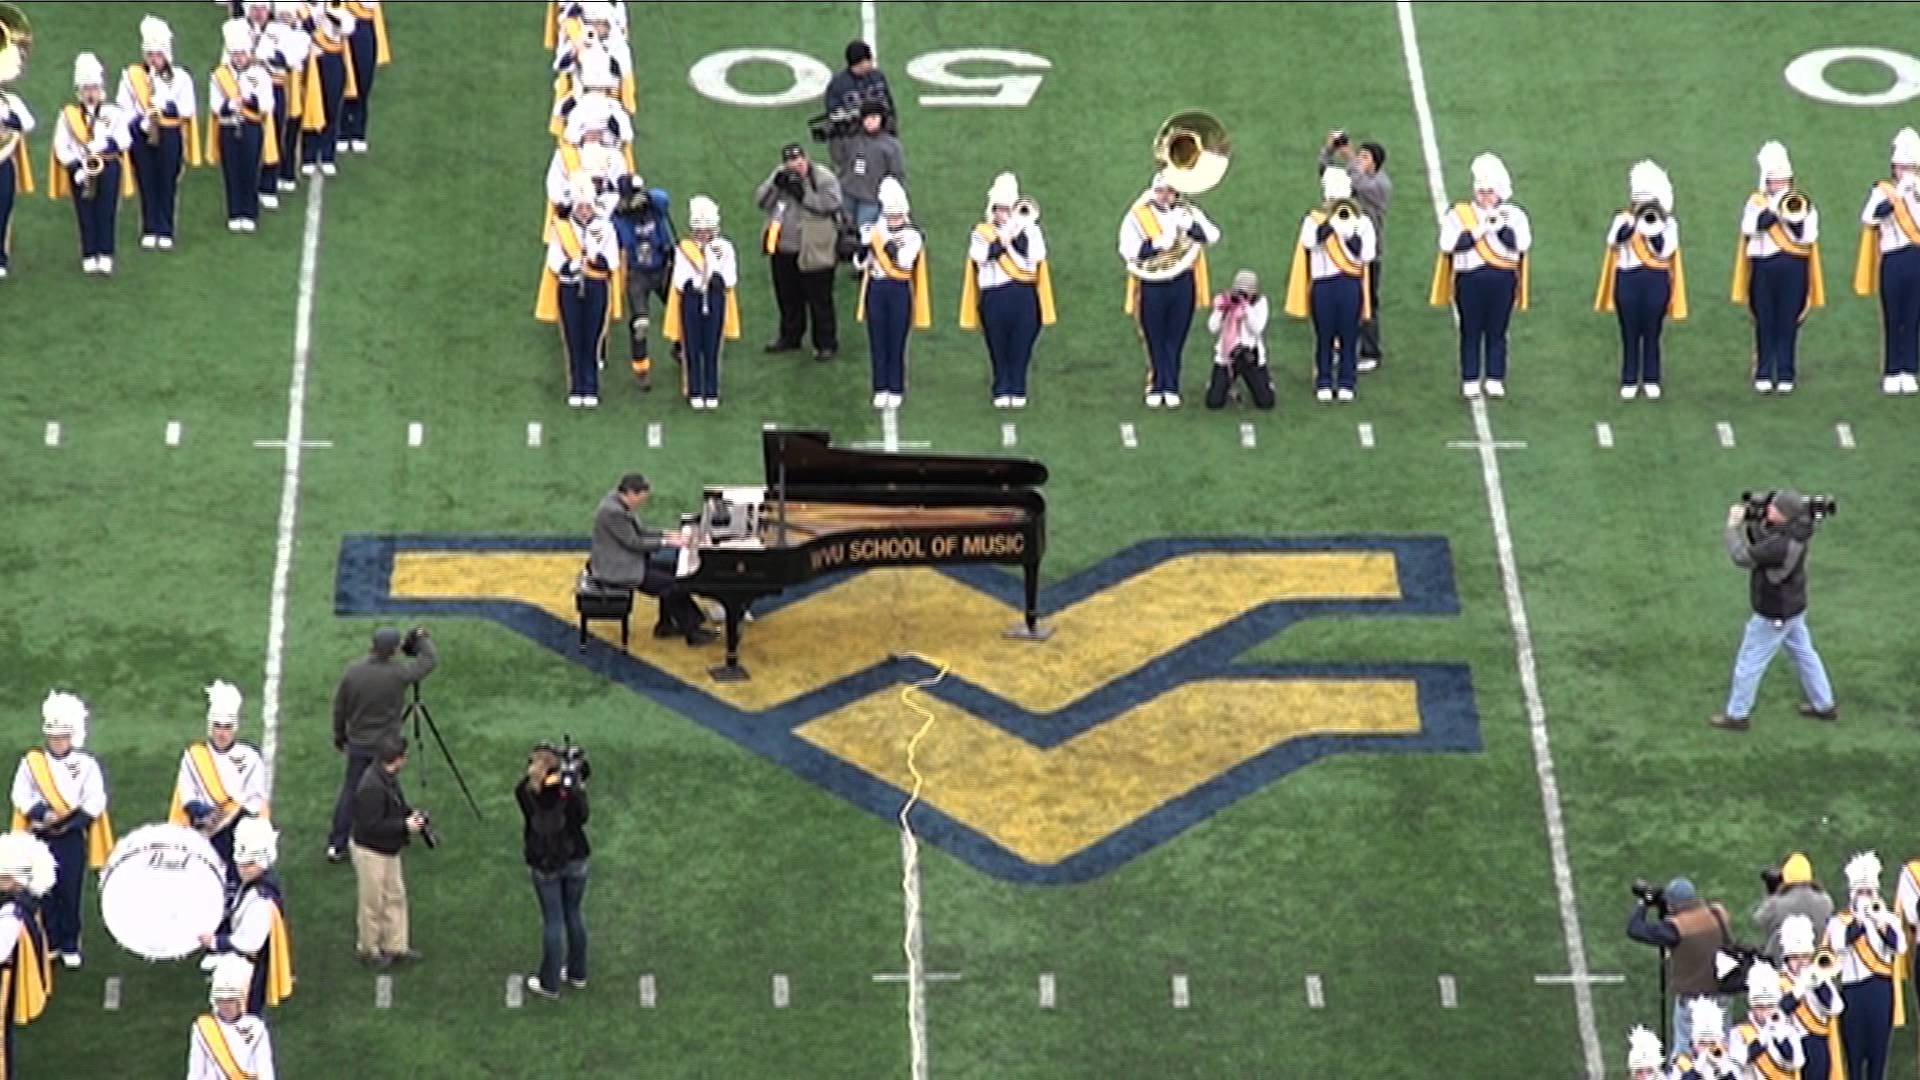 1920x1080 "Country Roads" - WVU Marching Band featuring James "Doc" Miltenberger -  YouTube